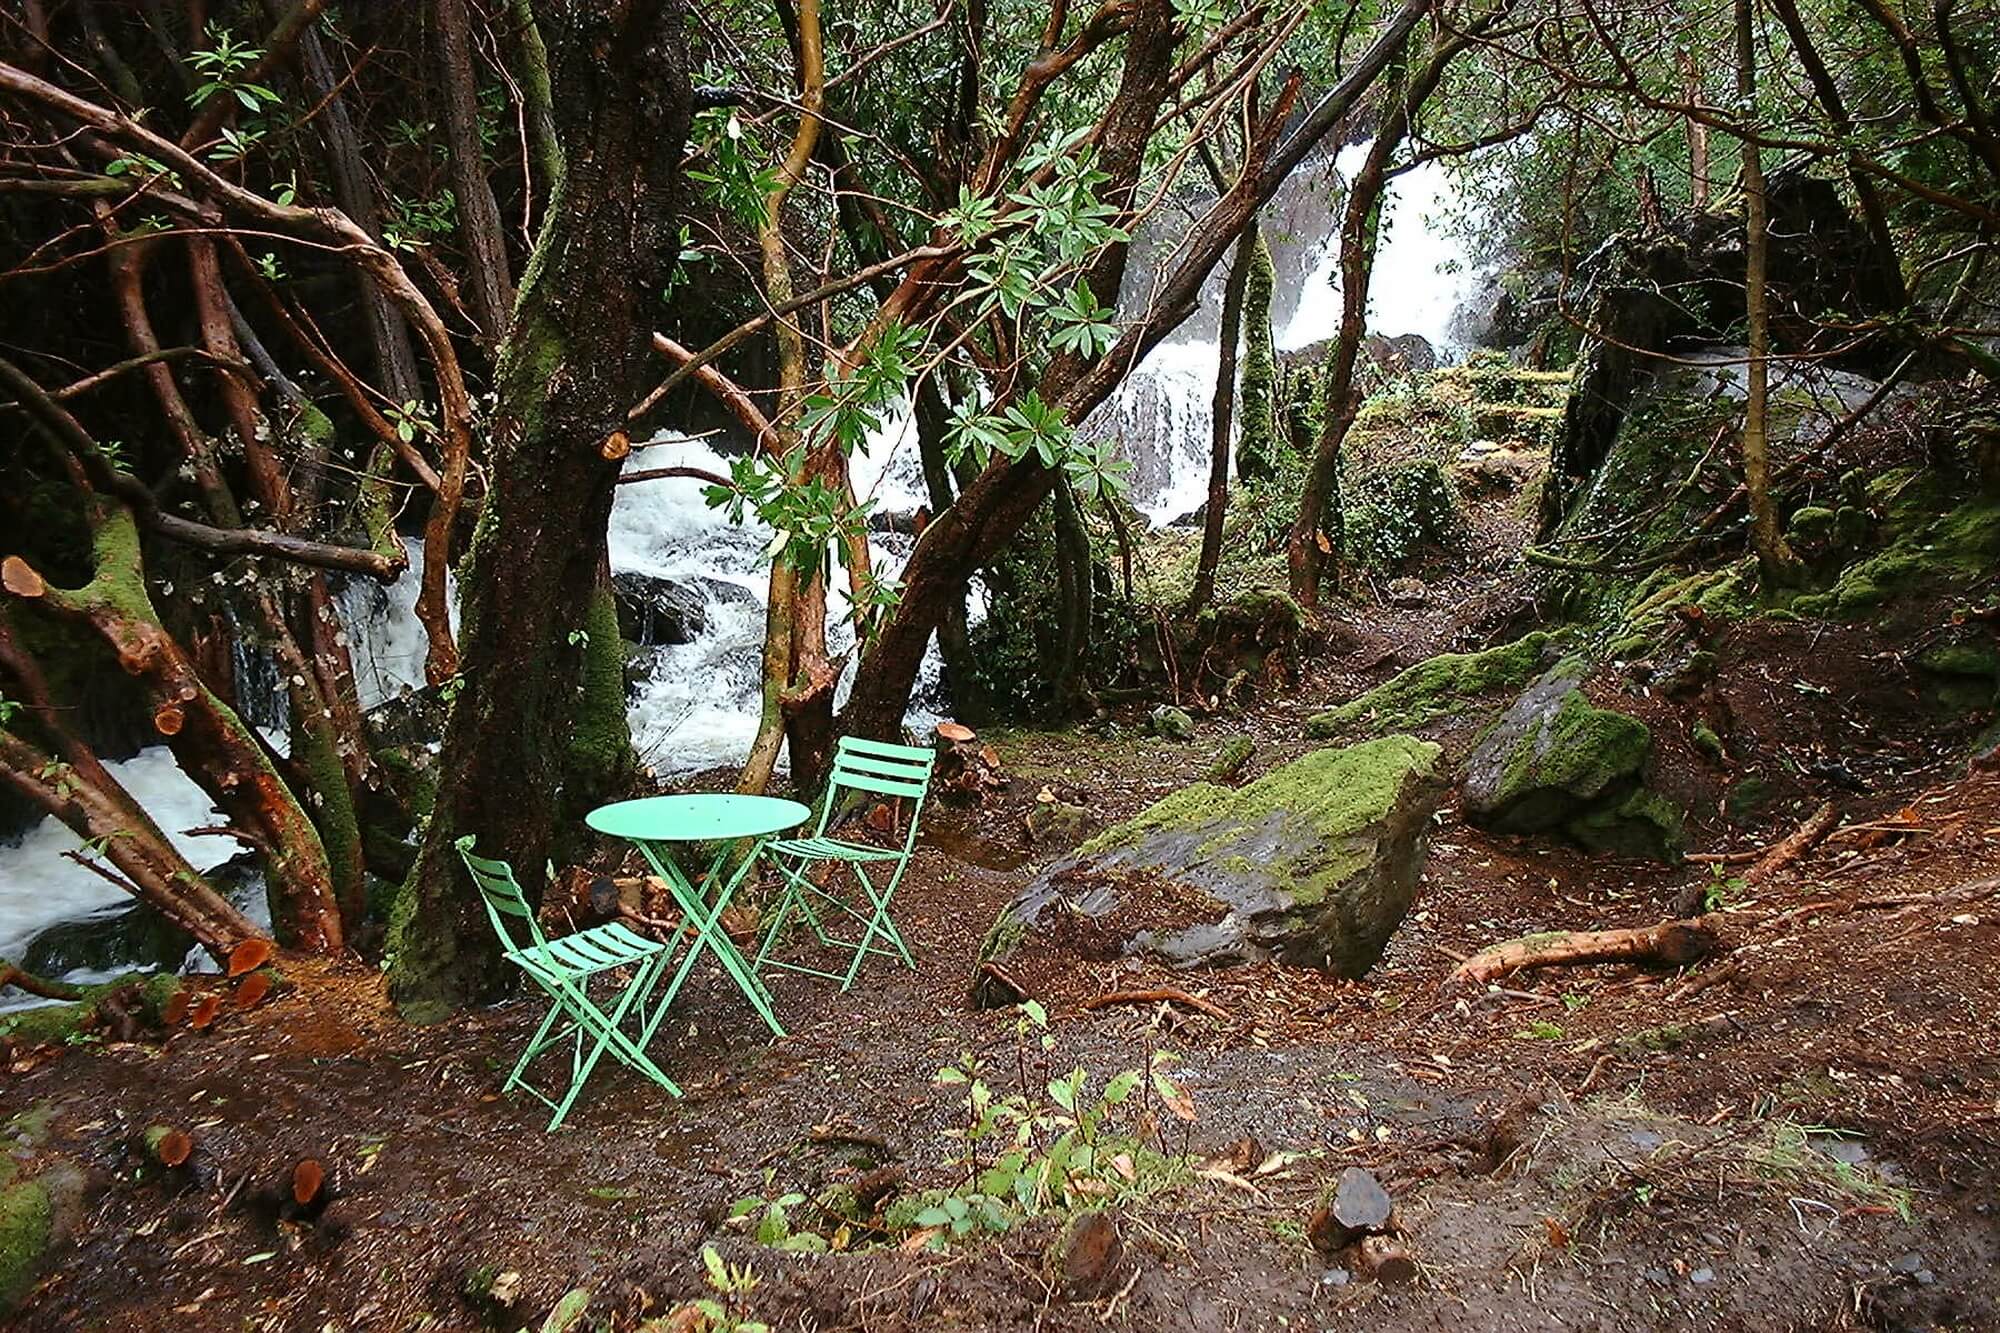 Gardens of Coolcreen have the best of both worlds - Natural rugged beauty and a great place to relax.